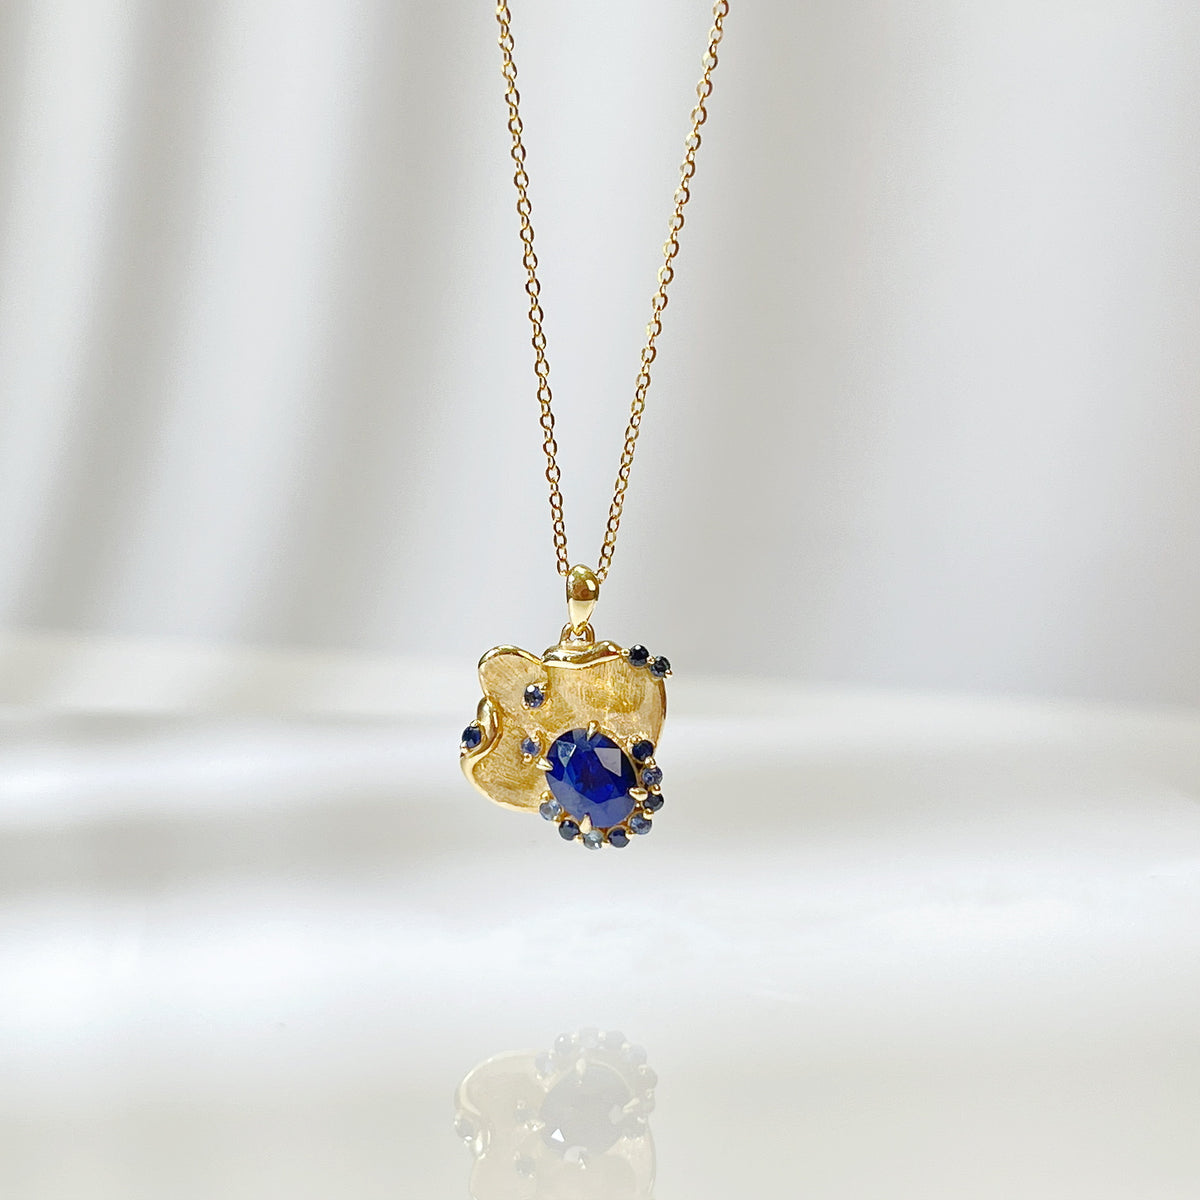 Shell design Blue Sapphire necklace 18K solid gold